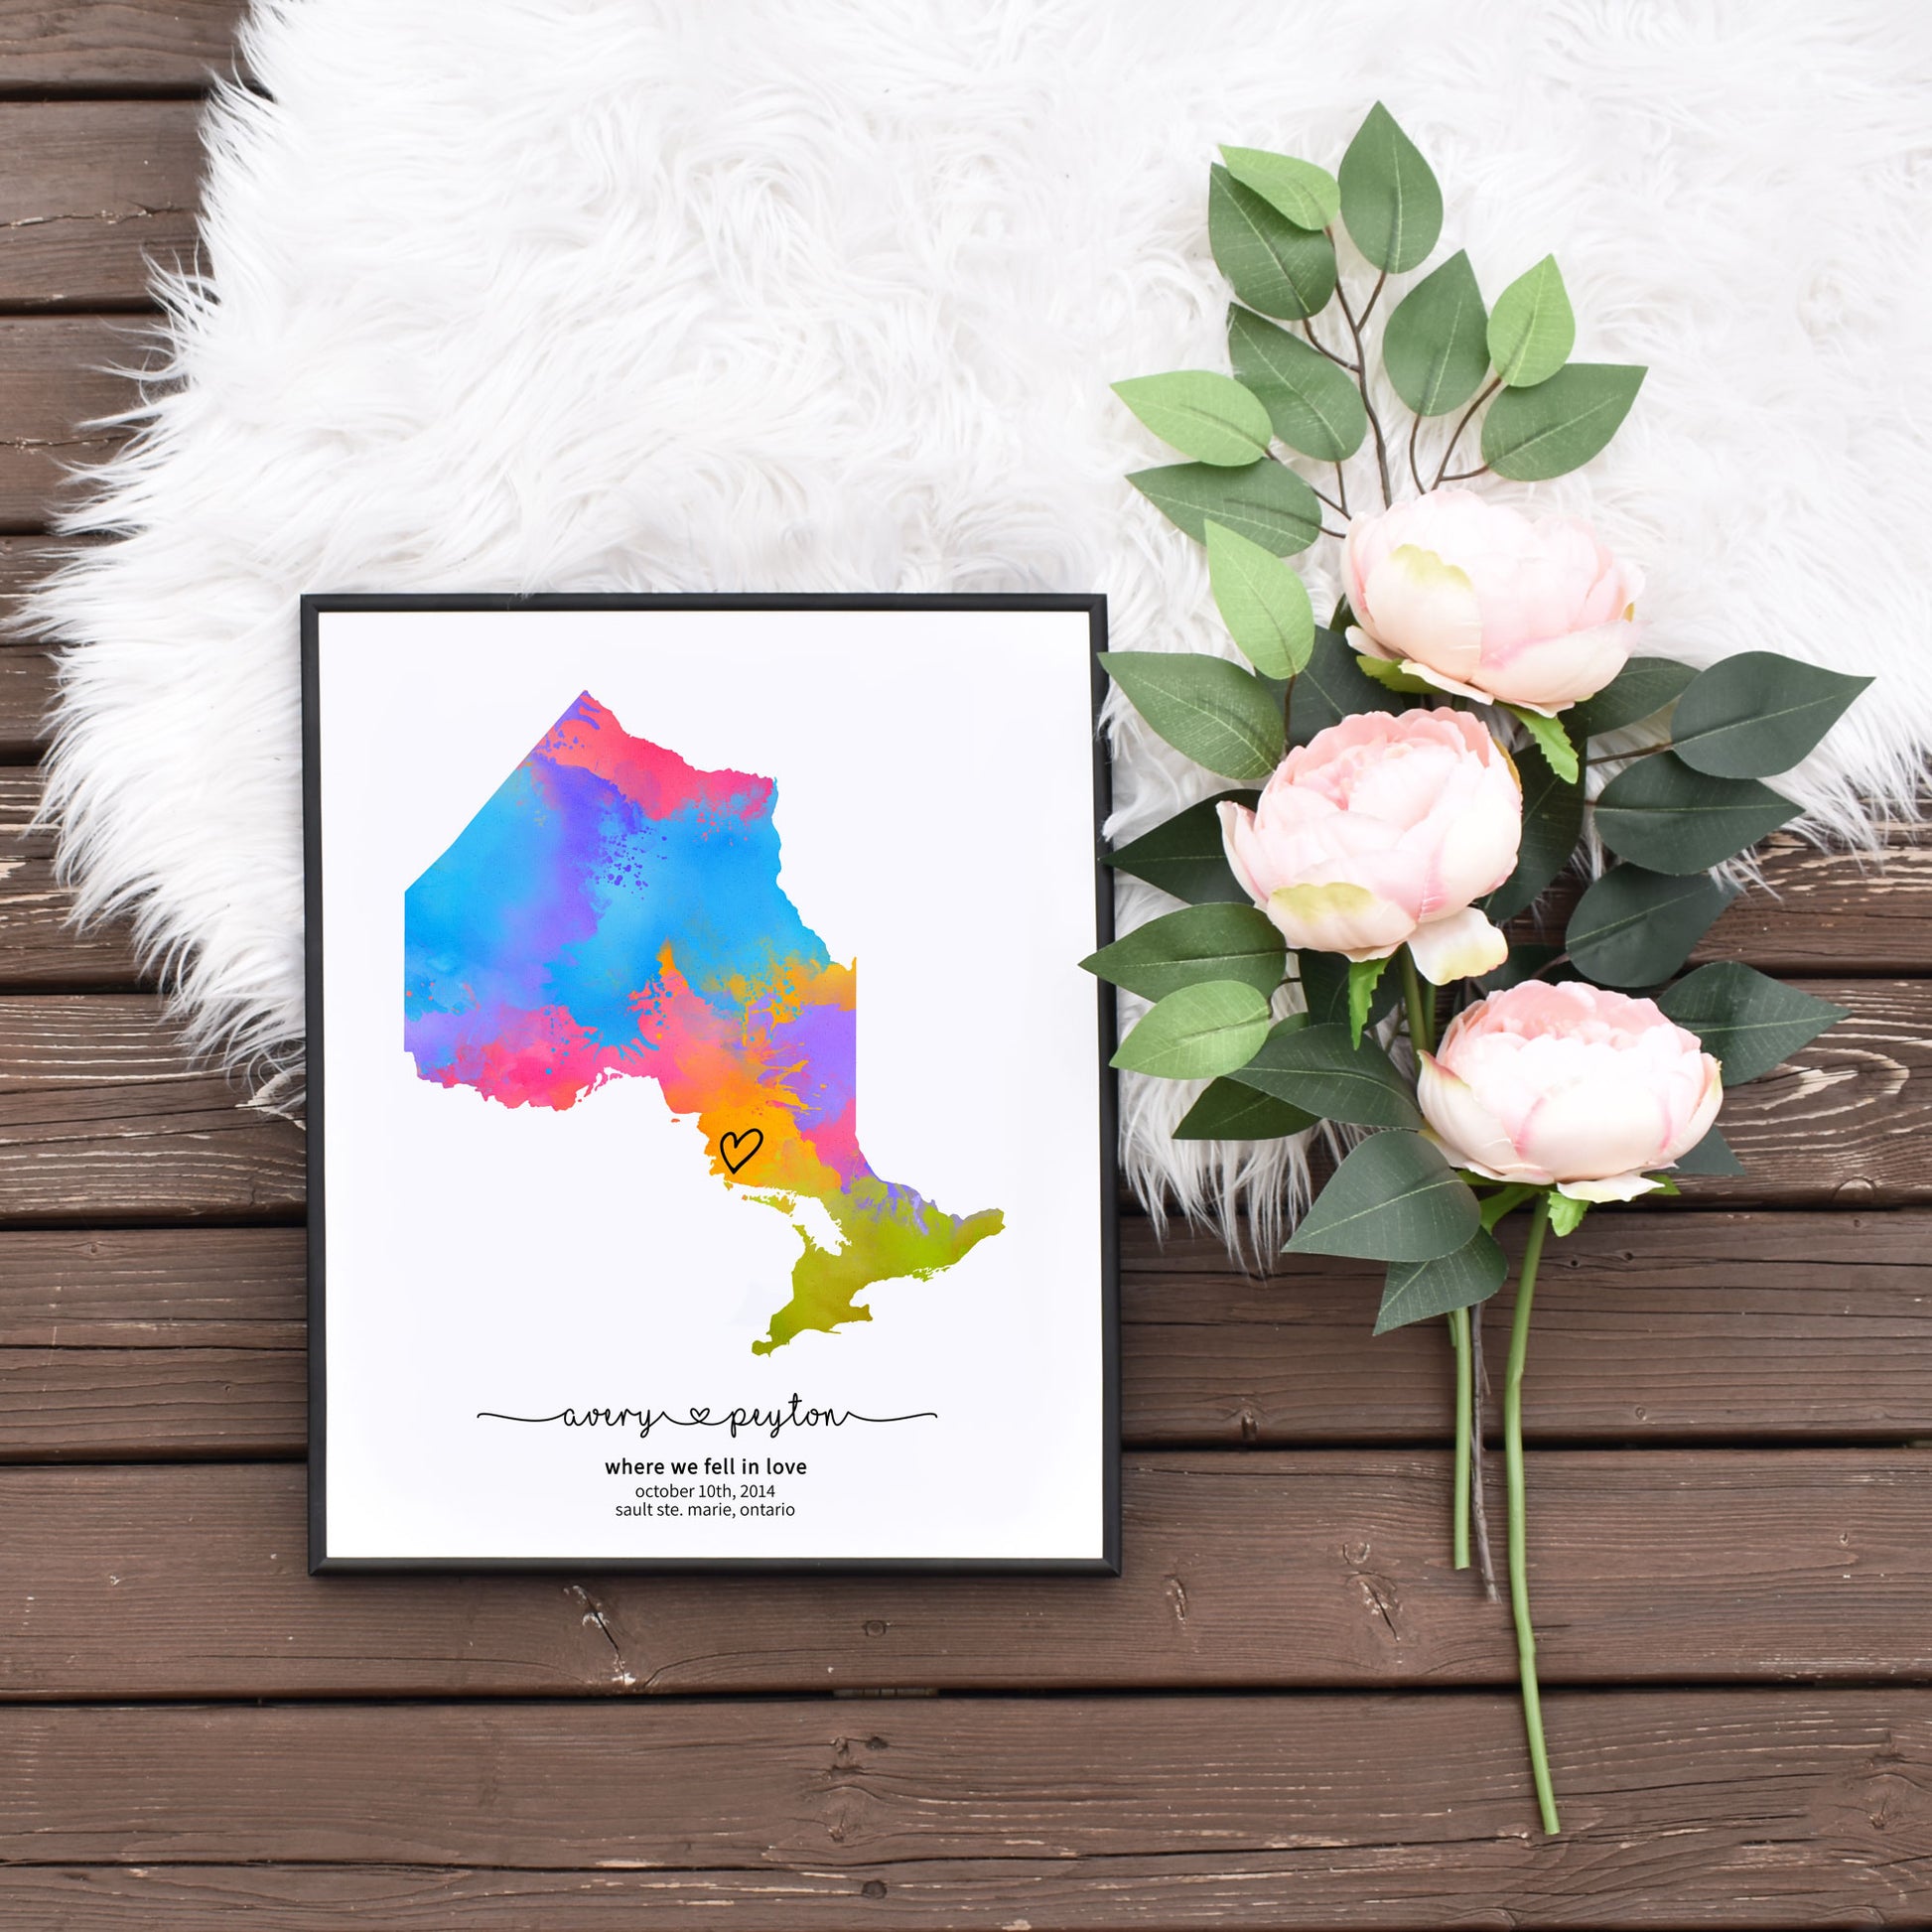 Quick Edit Yourself Where We Fell In Love Map of Ontario Personalized Gift for Her